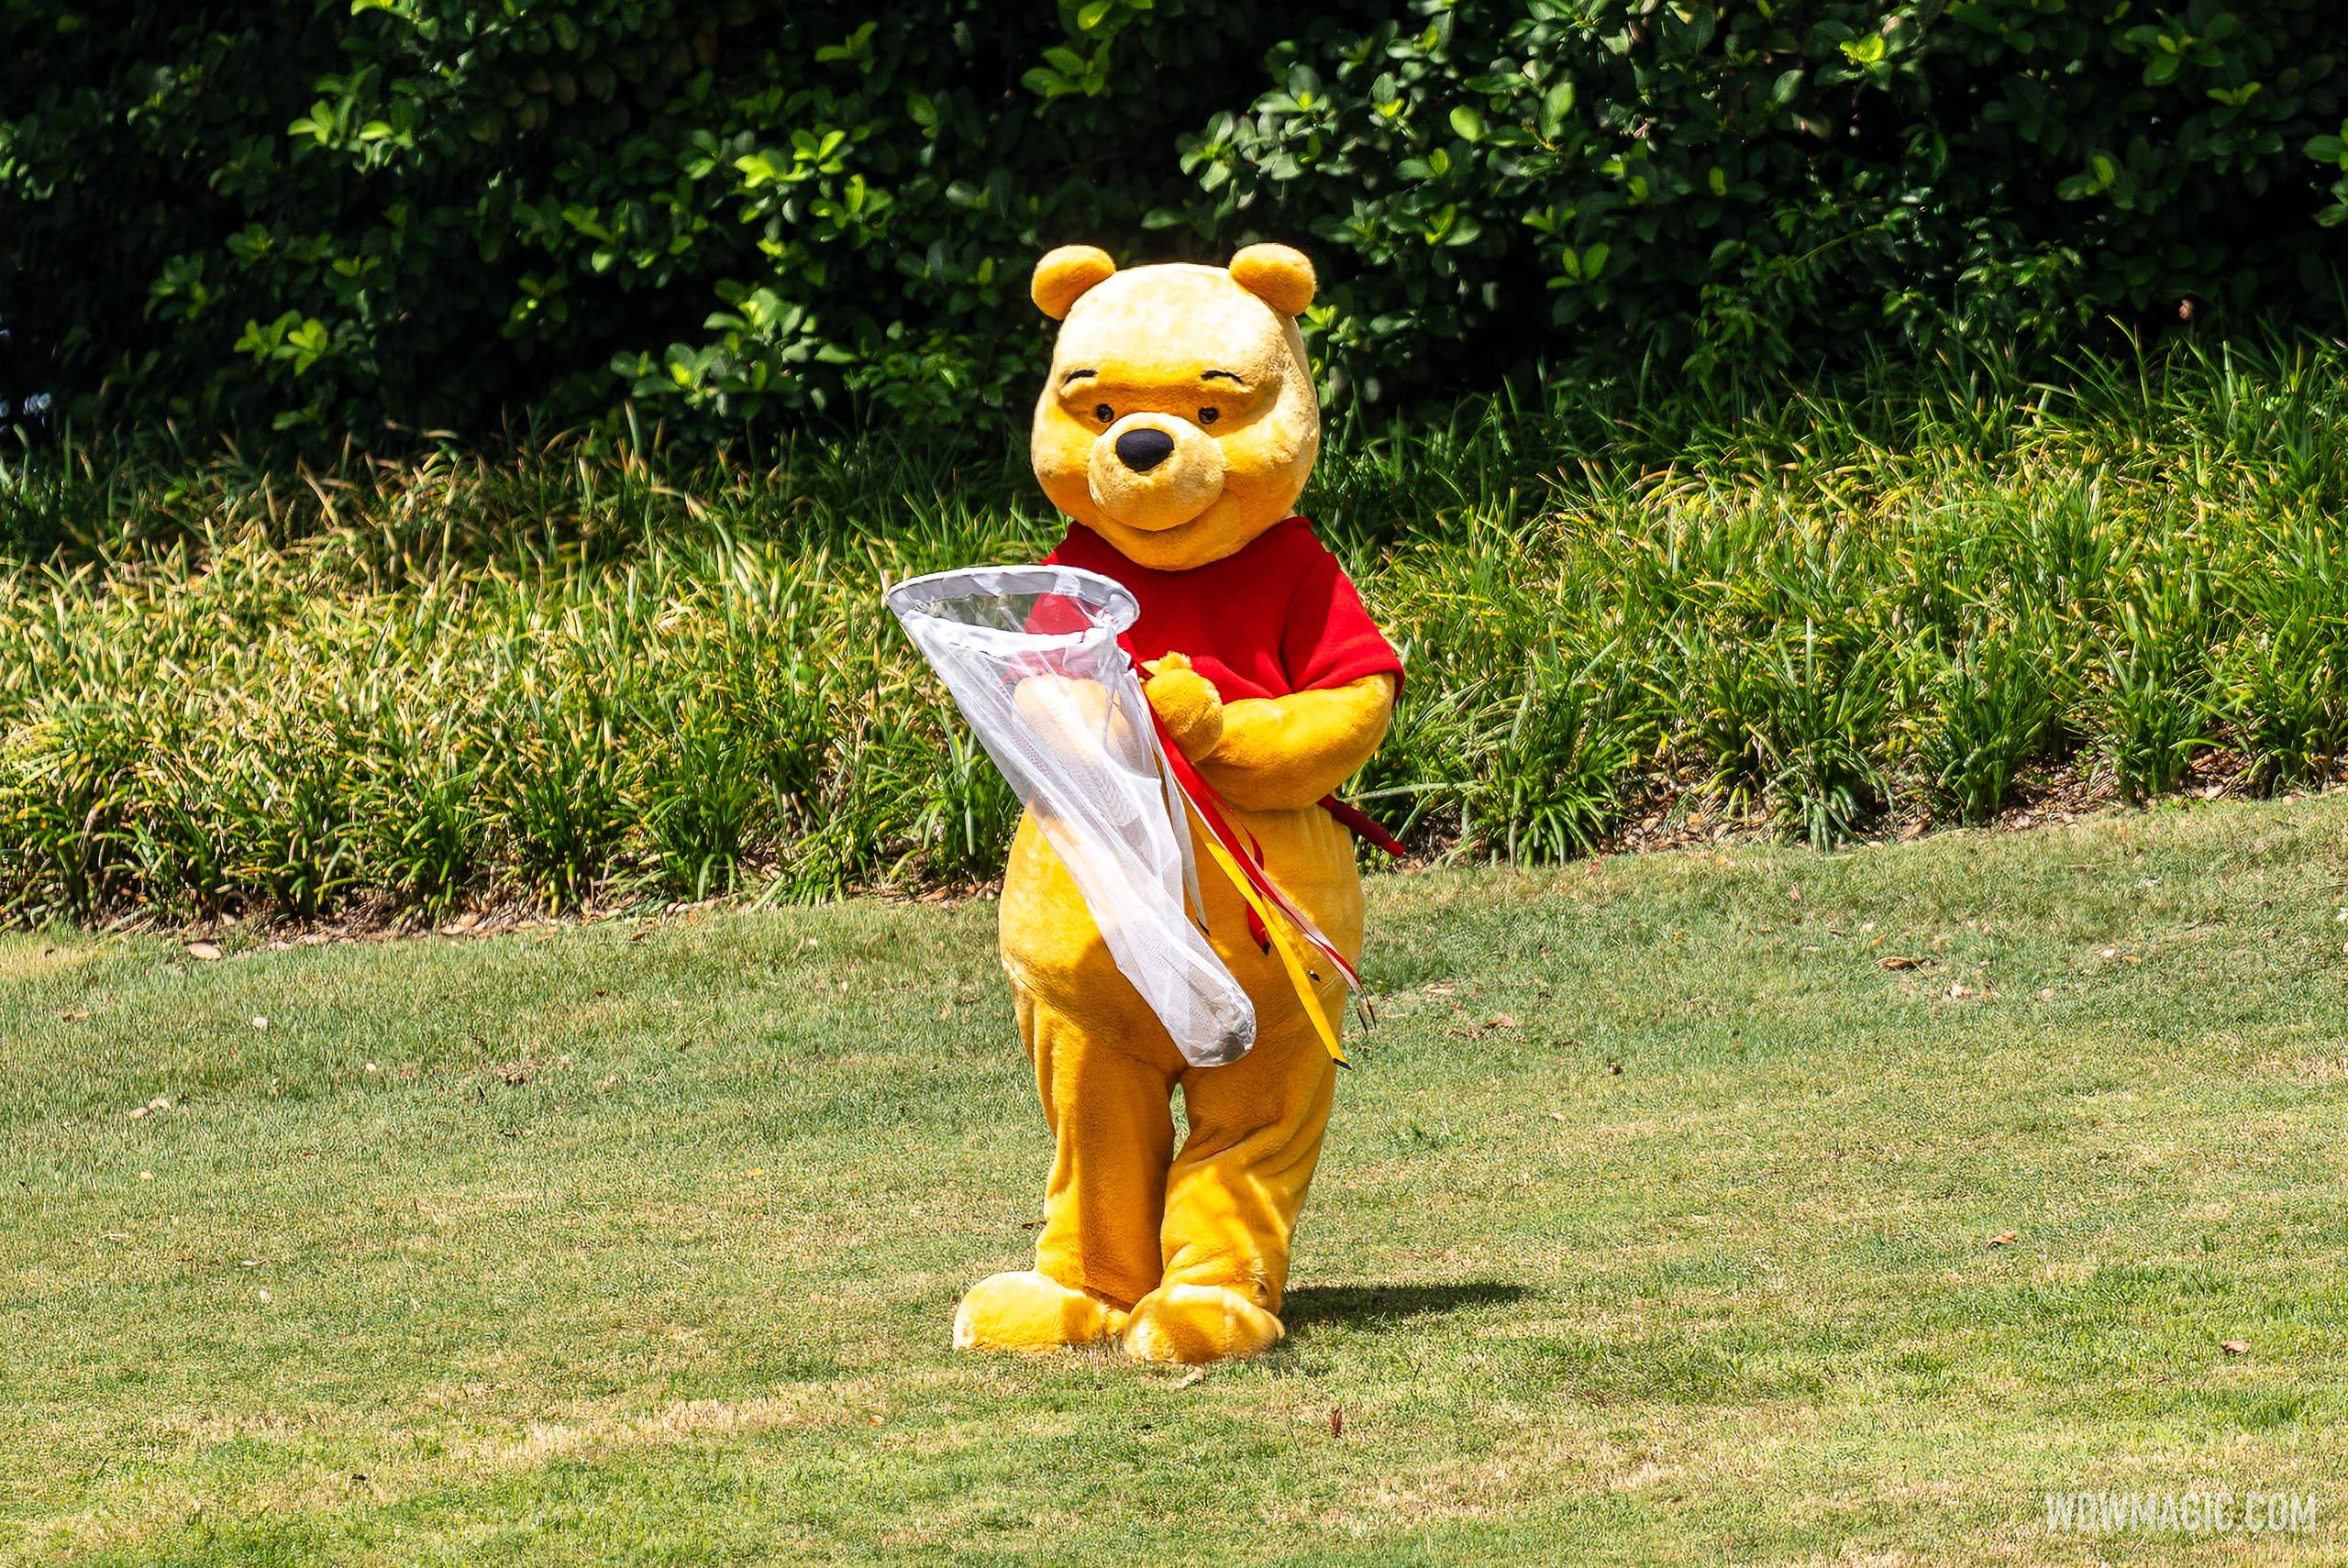 Winnie the Pooh character sighting in World Celebration at EPCOT